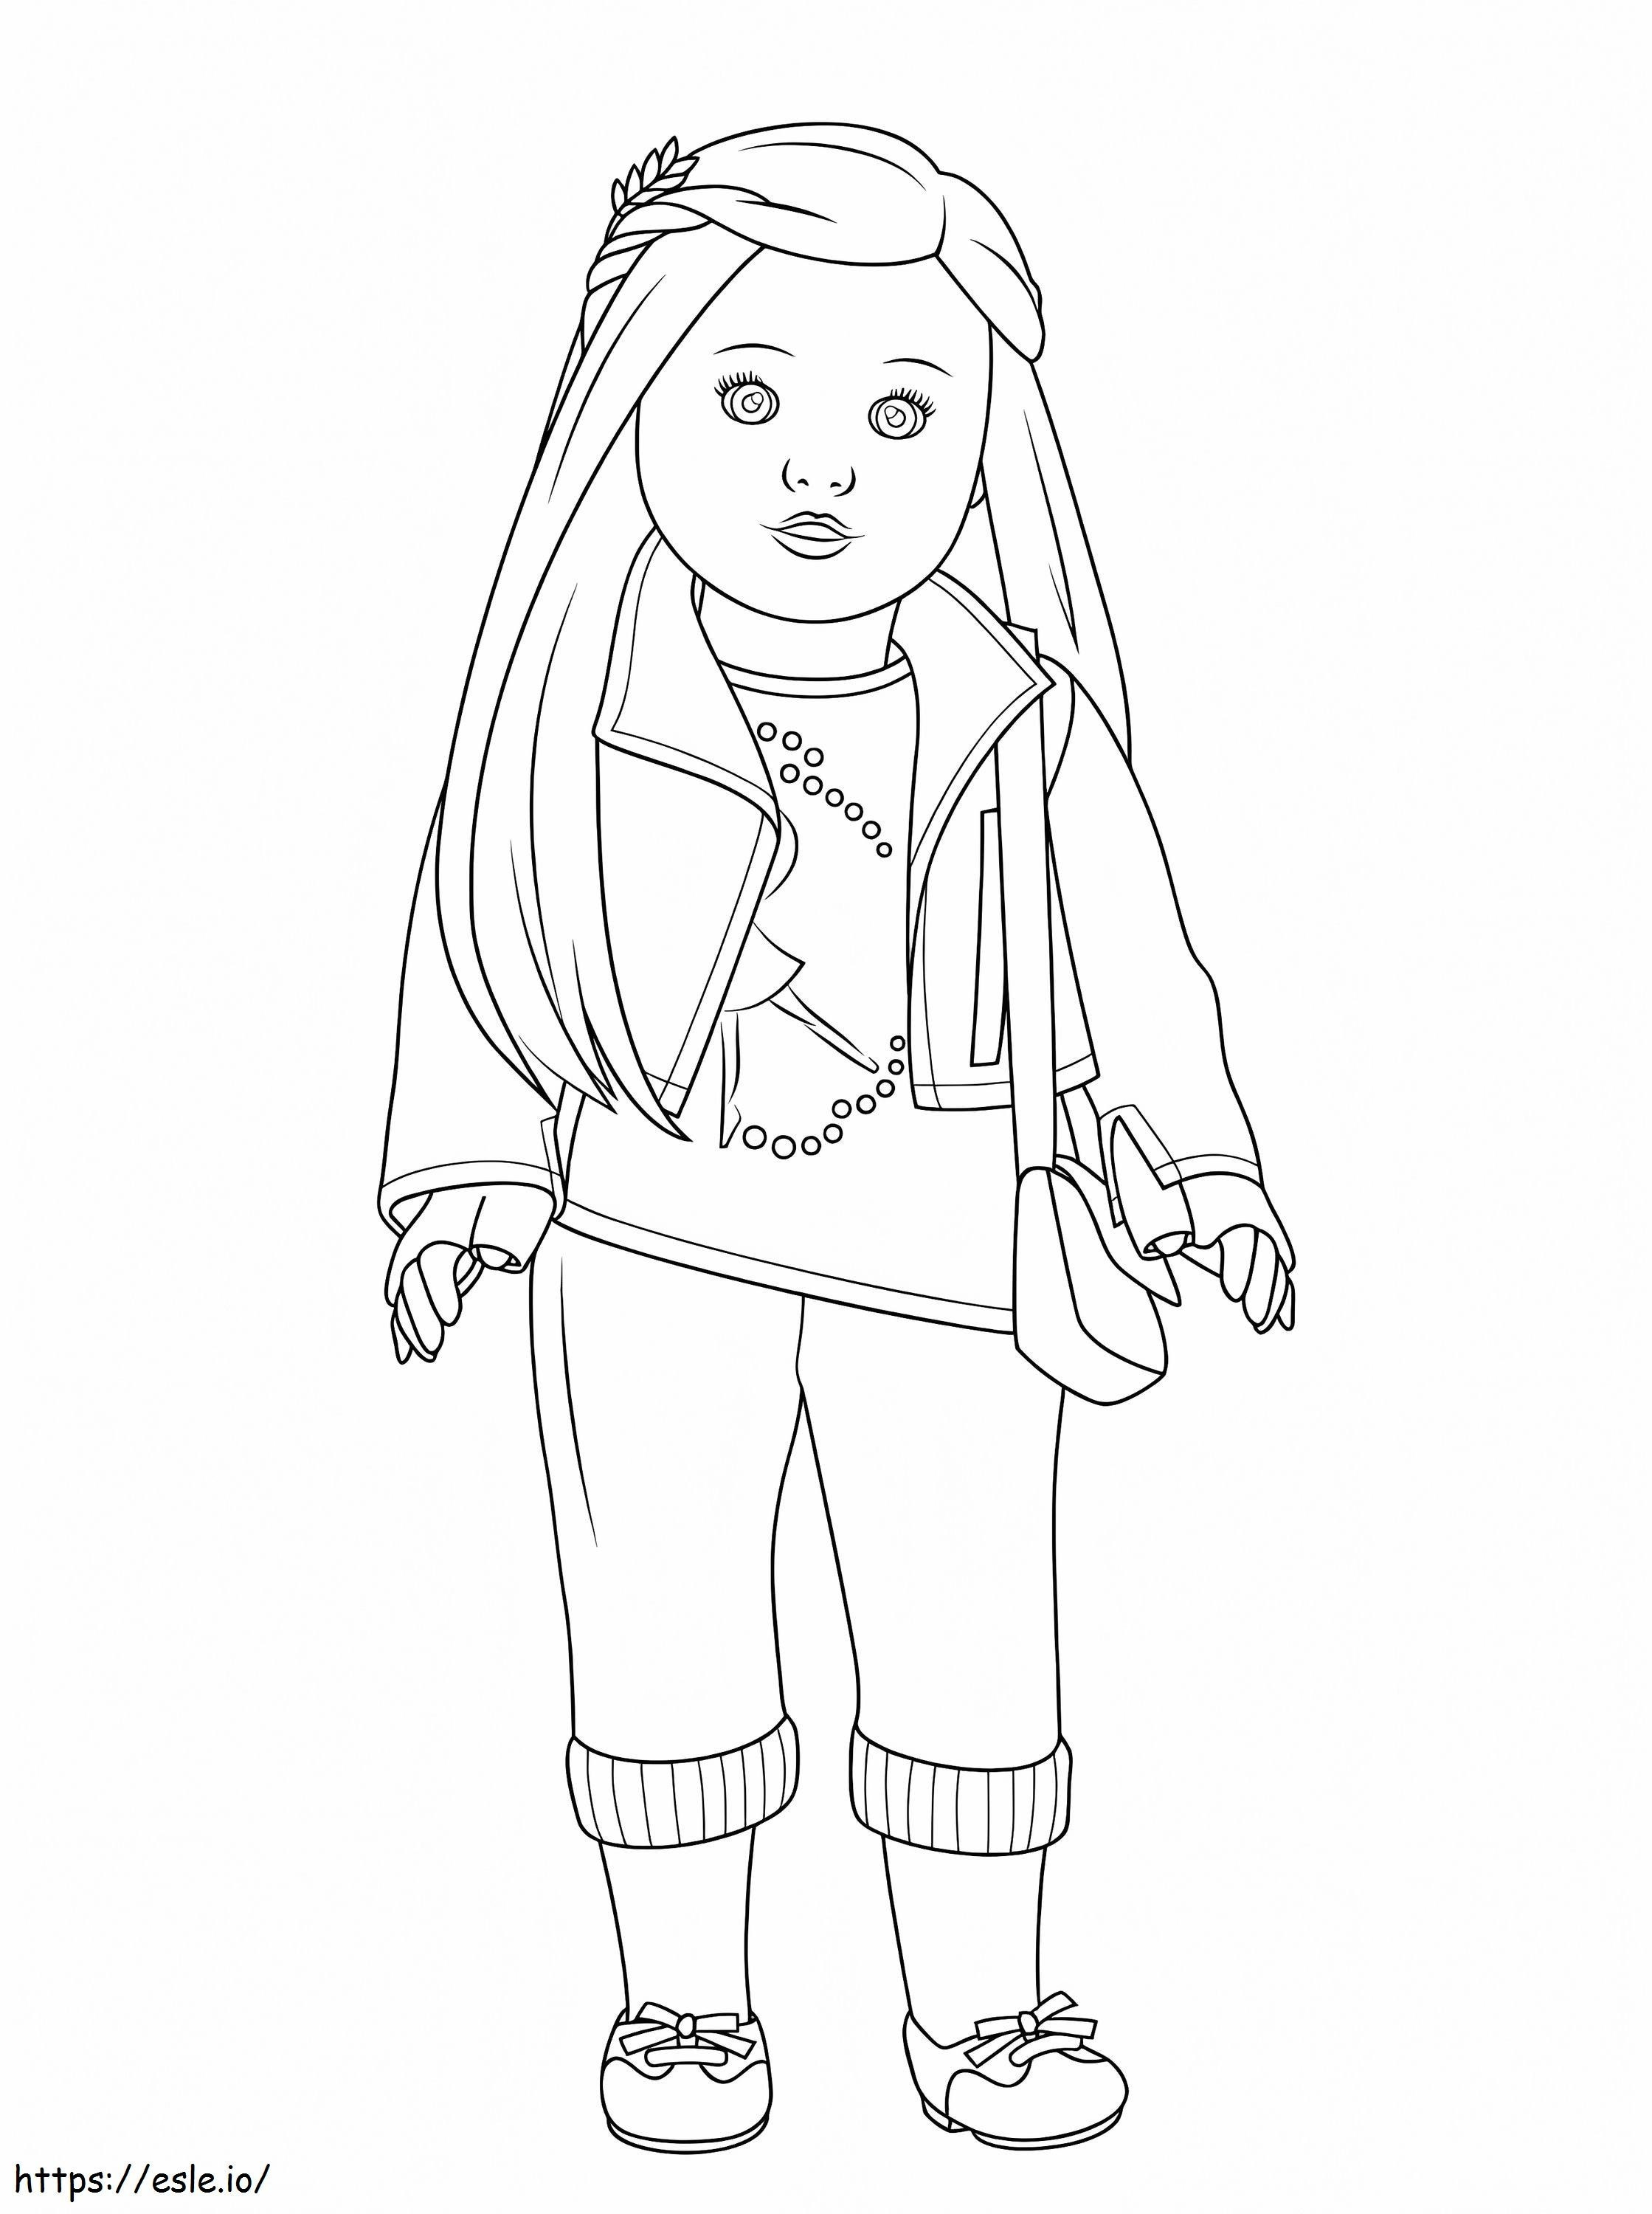 American Girl Isabelle Doll coloring page